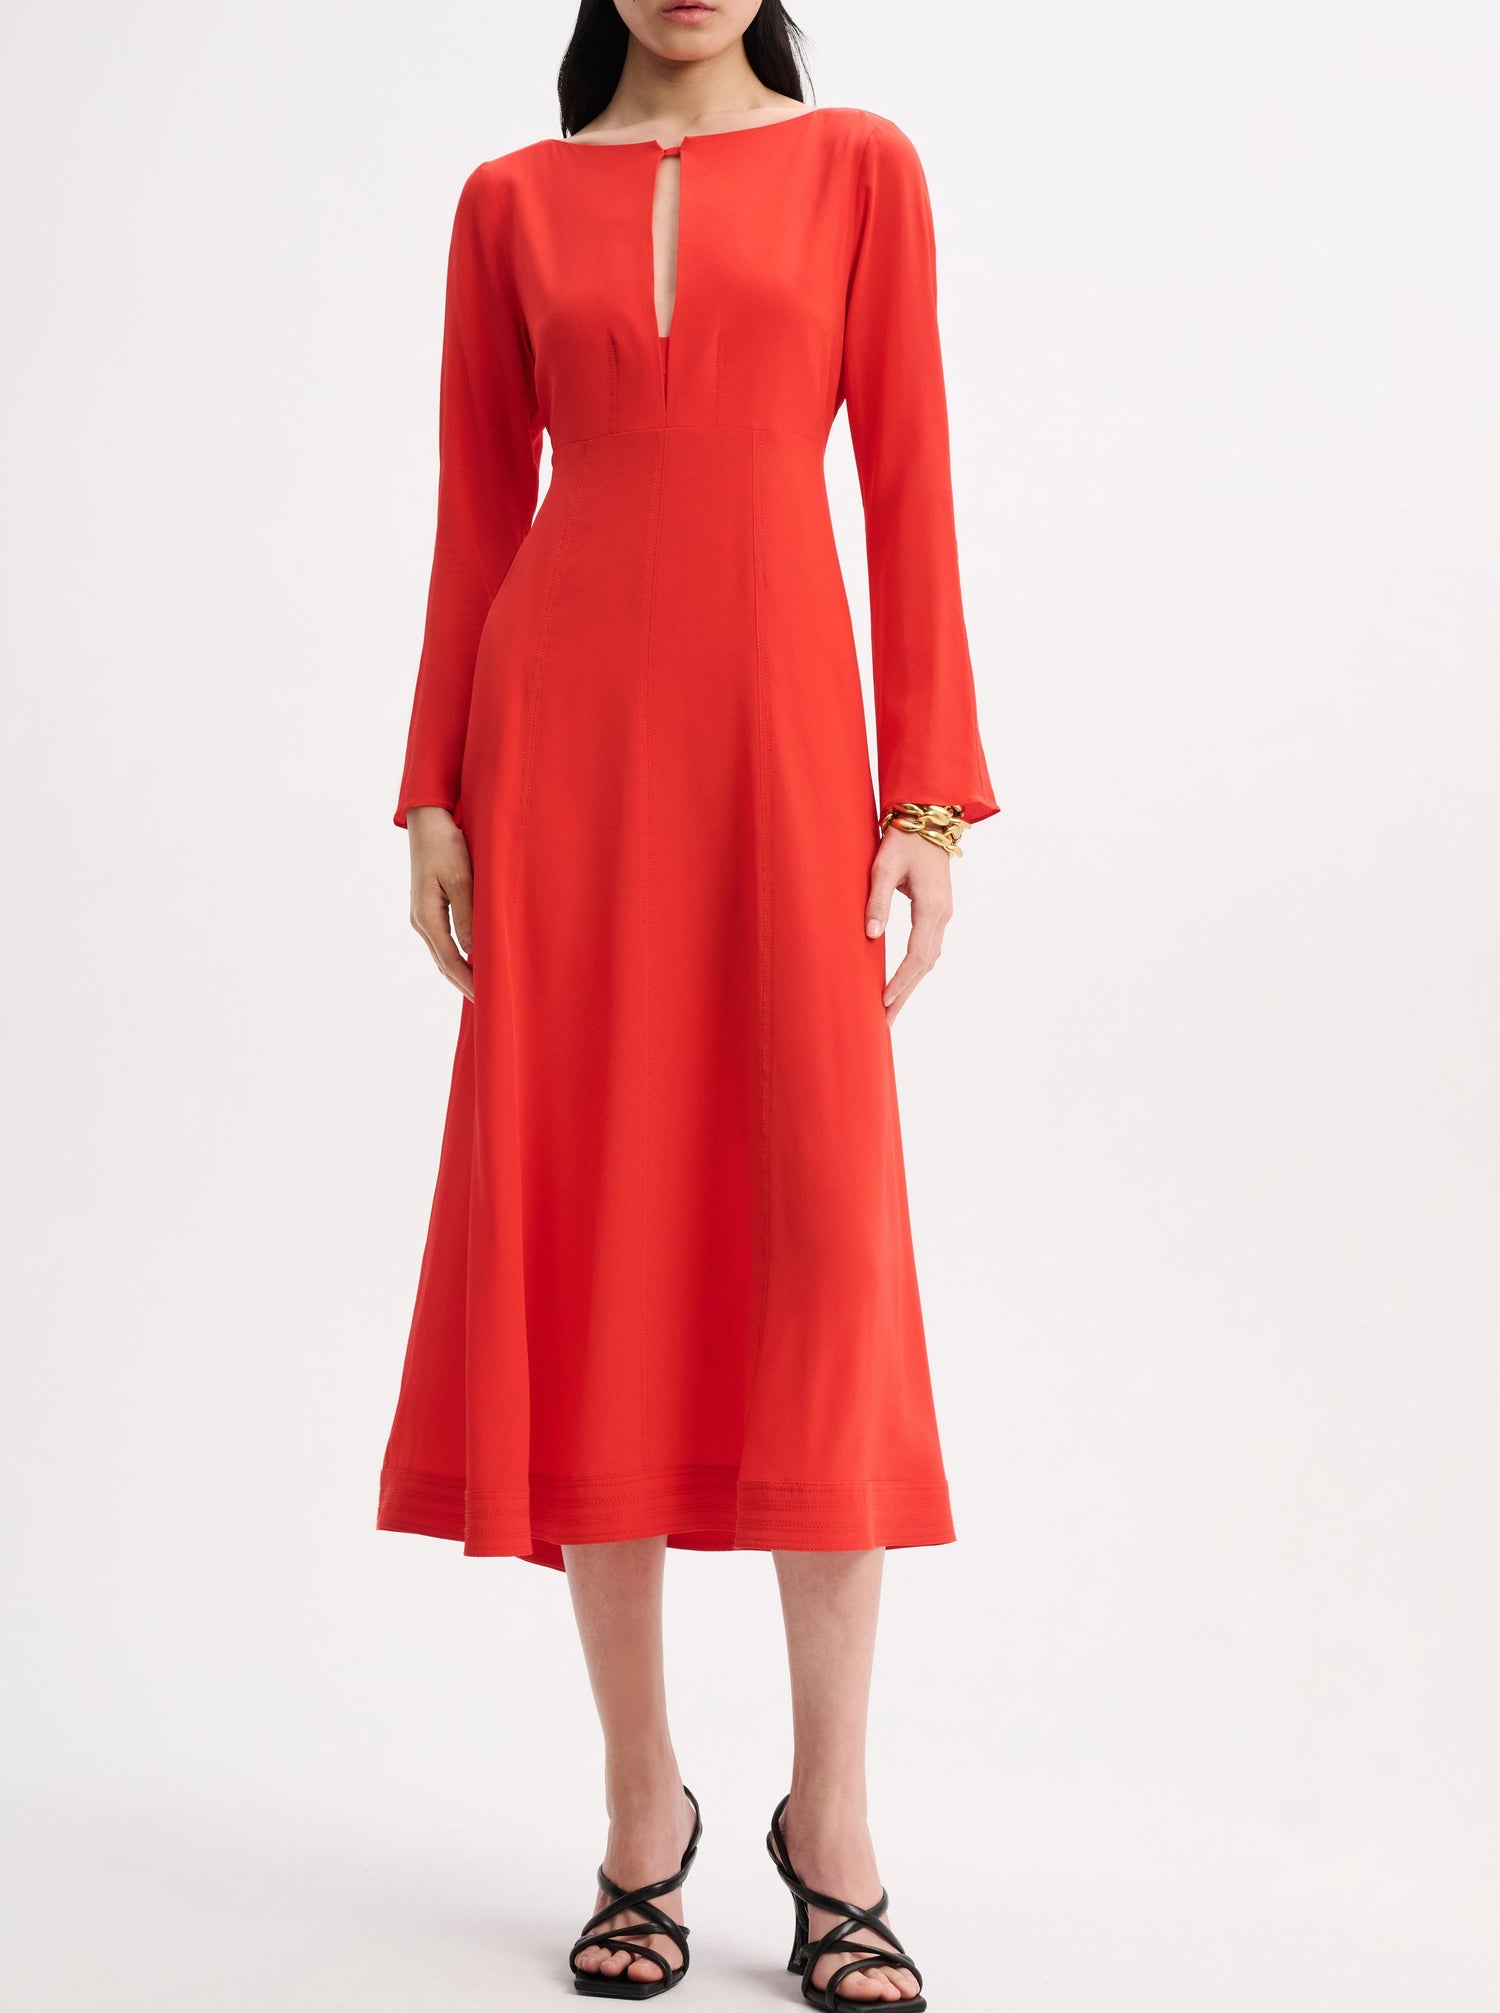 SOPHISTICATED VOLUMES dress, shiny red